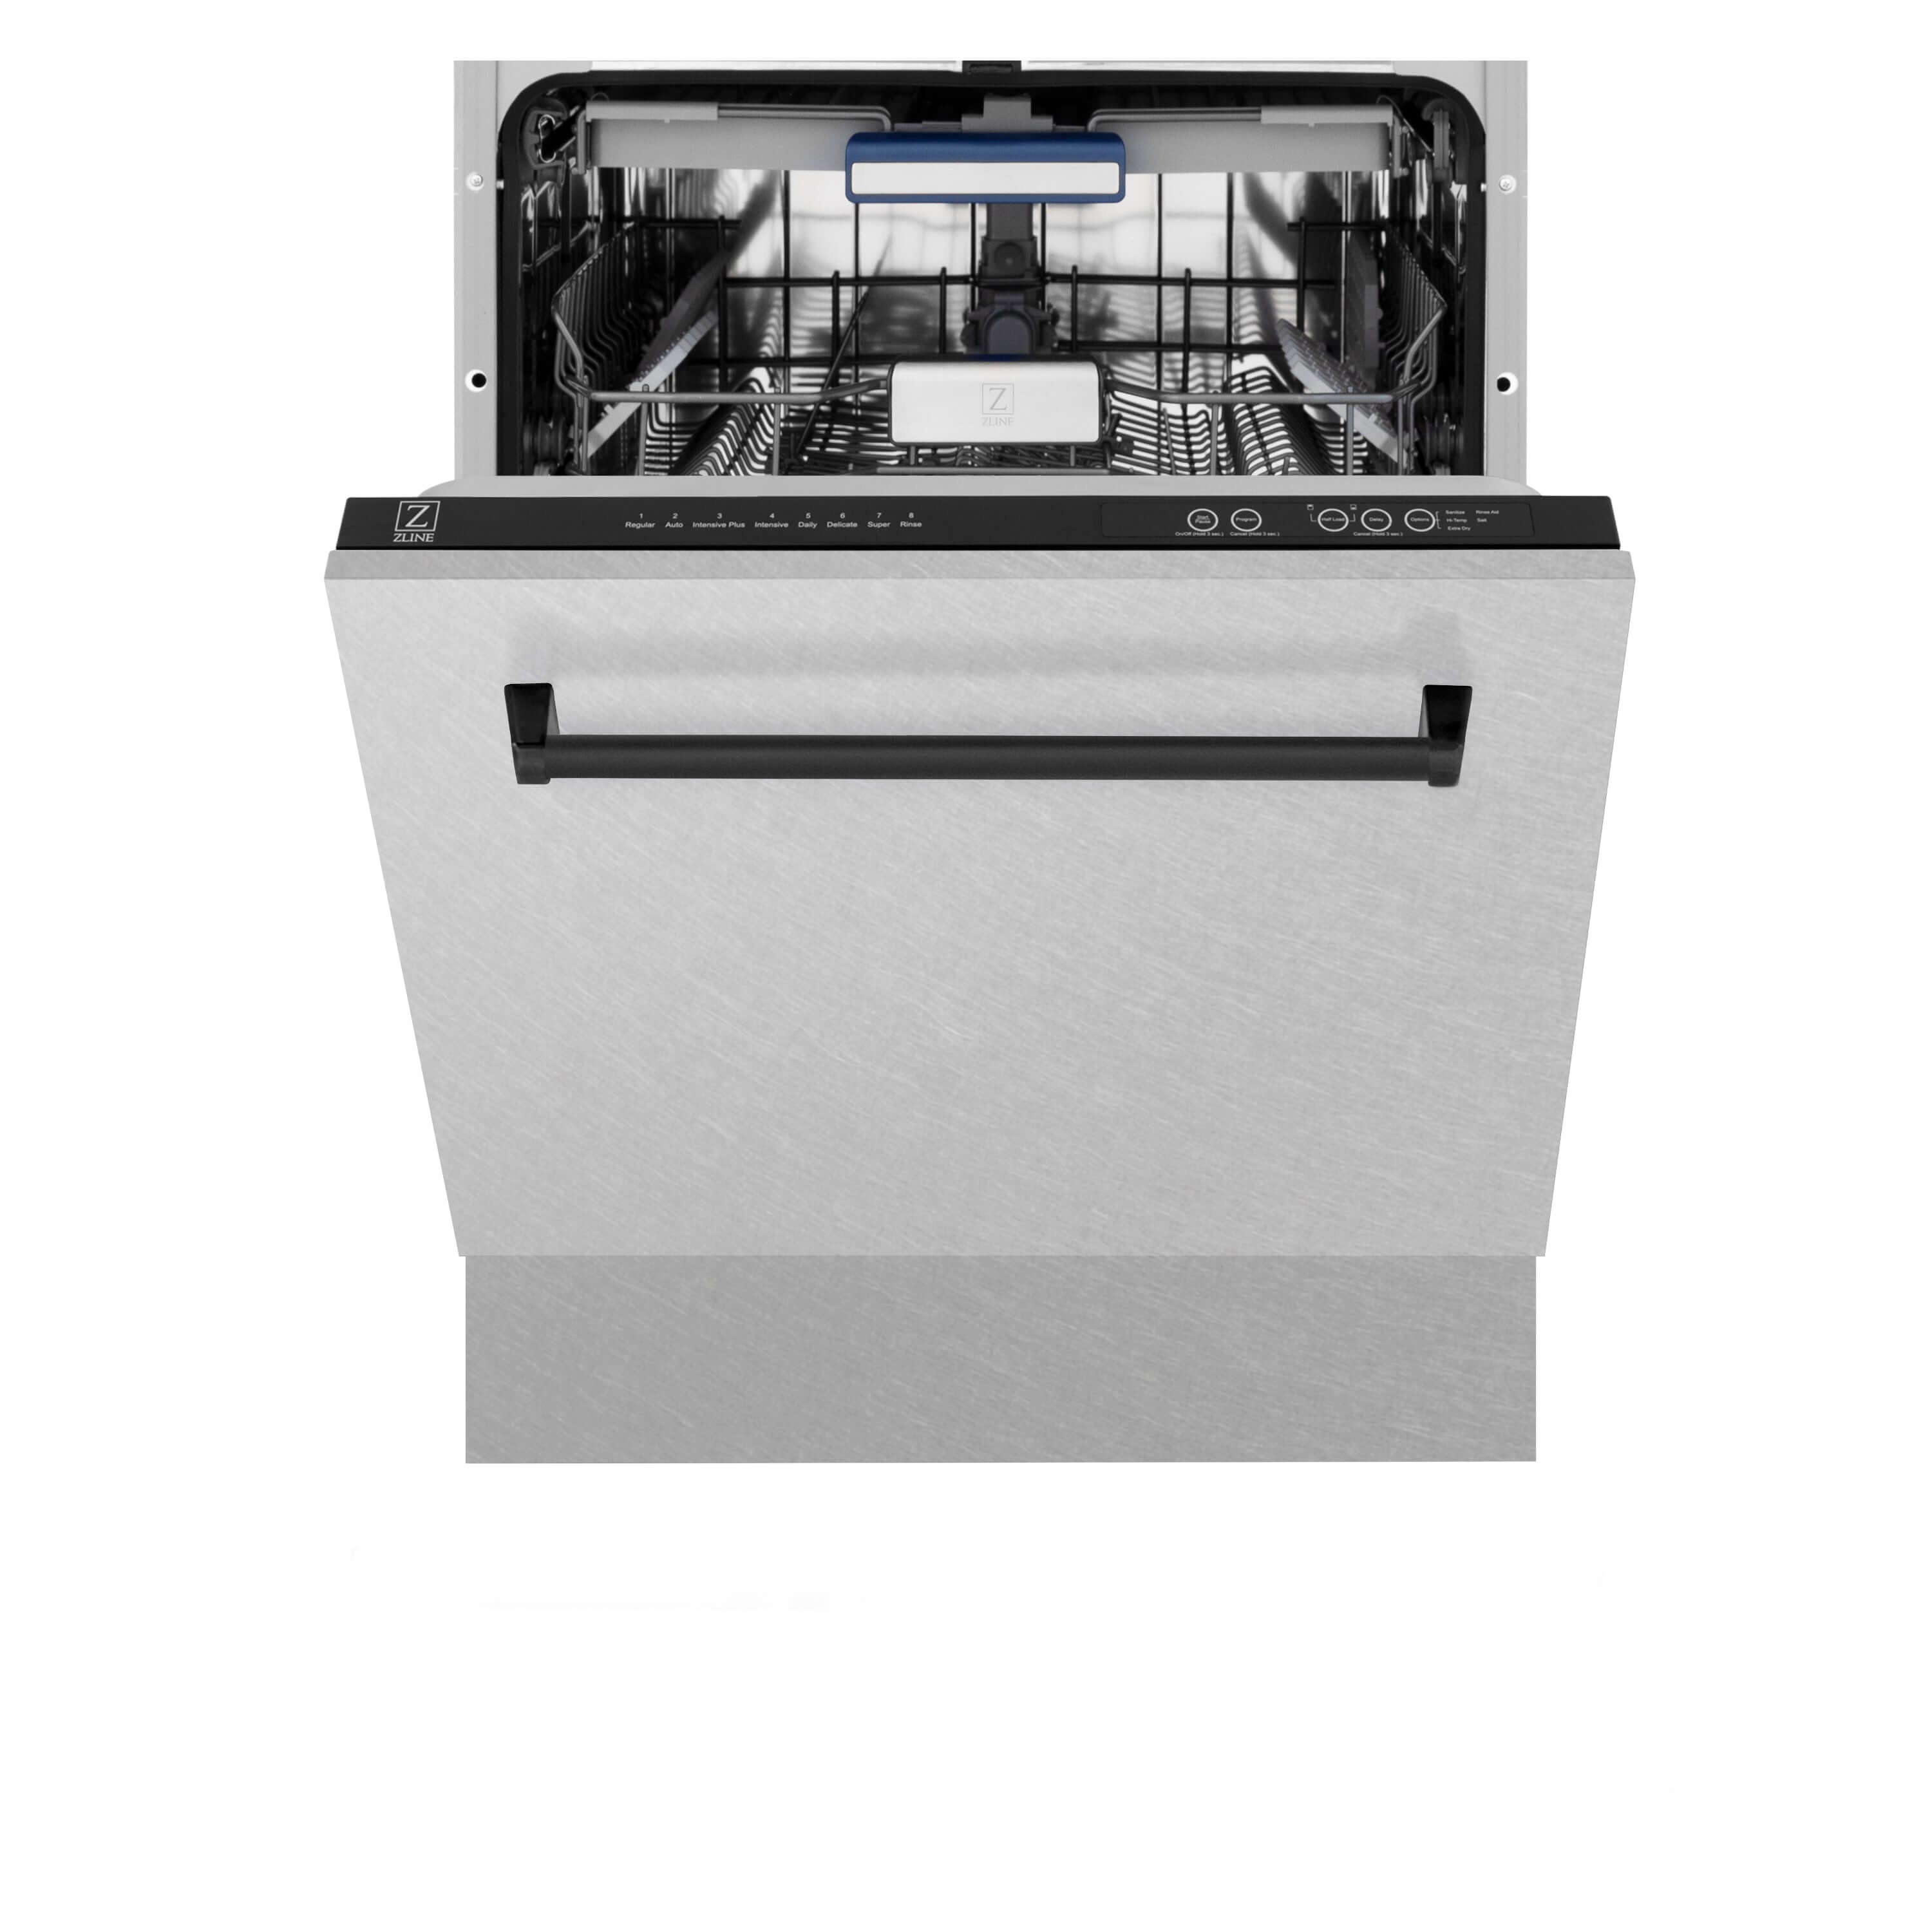 ZLINE Autograph Edition 24 in. Tallac Series 3rd Rack Top Control Built-In Tall Tub Dishwasher in Fingerprint Resistant Stainless Steel with Matte Black Handle, 51dBa (DWVZ-SN-24-MB) front, half open.